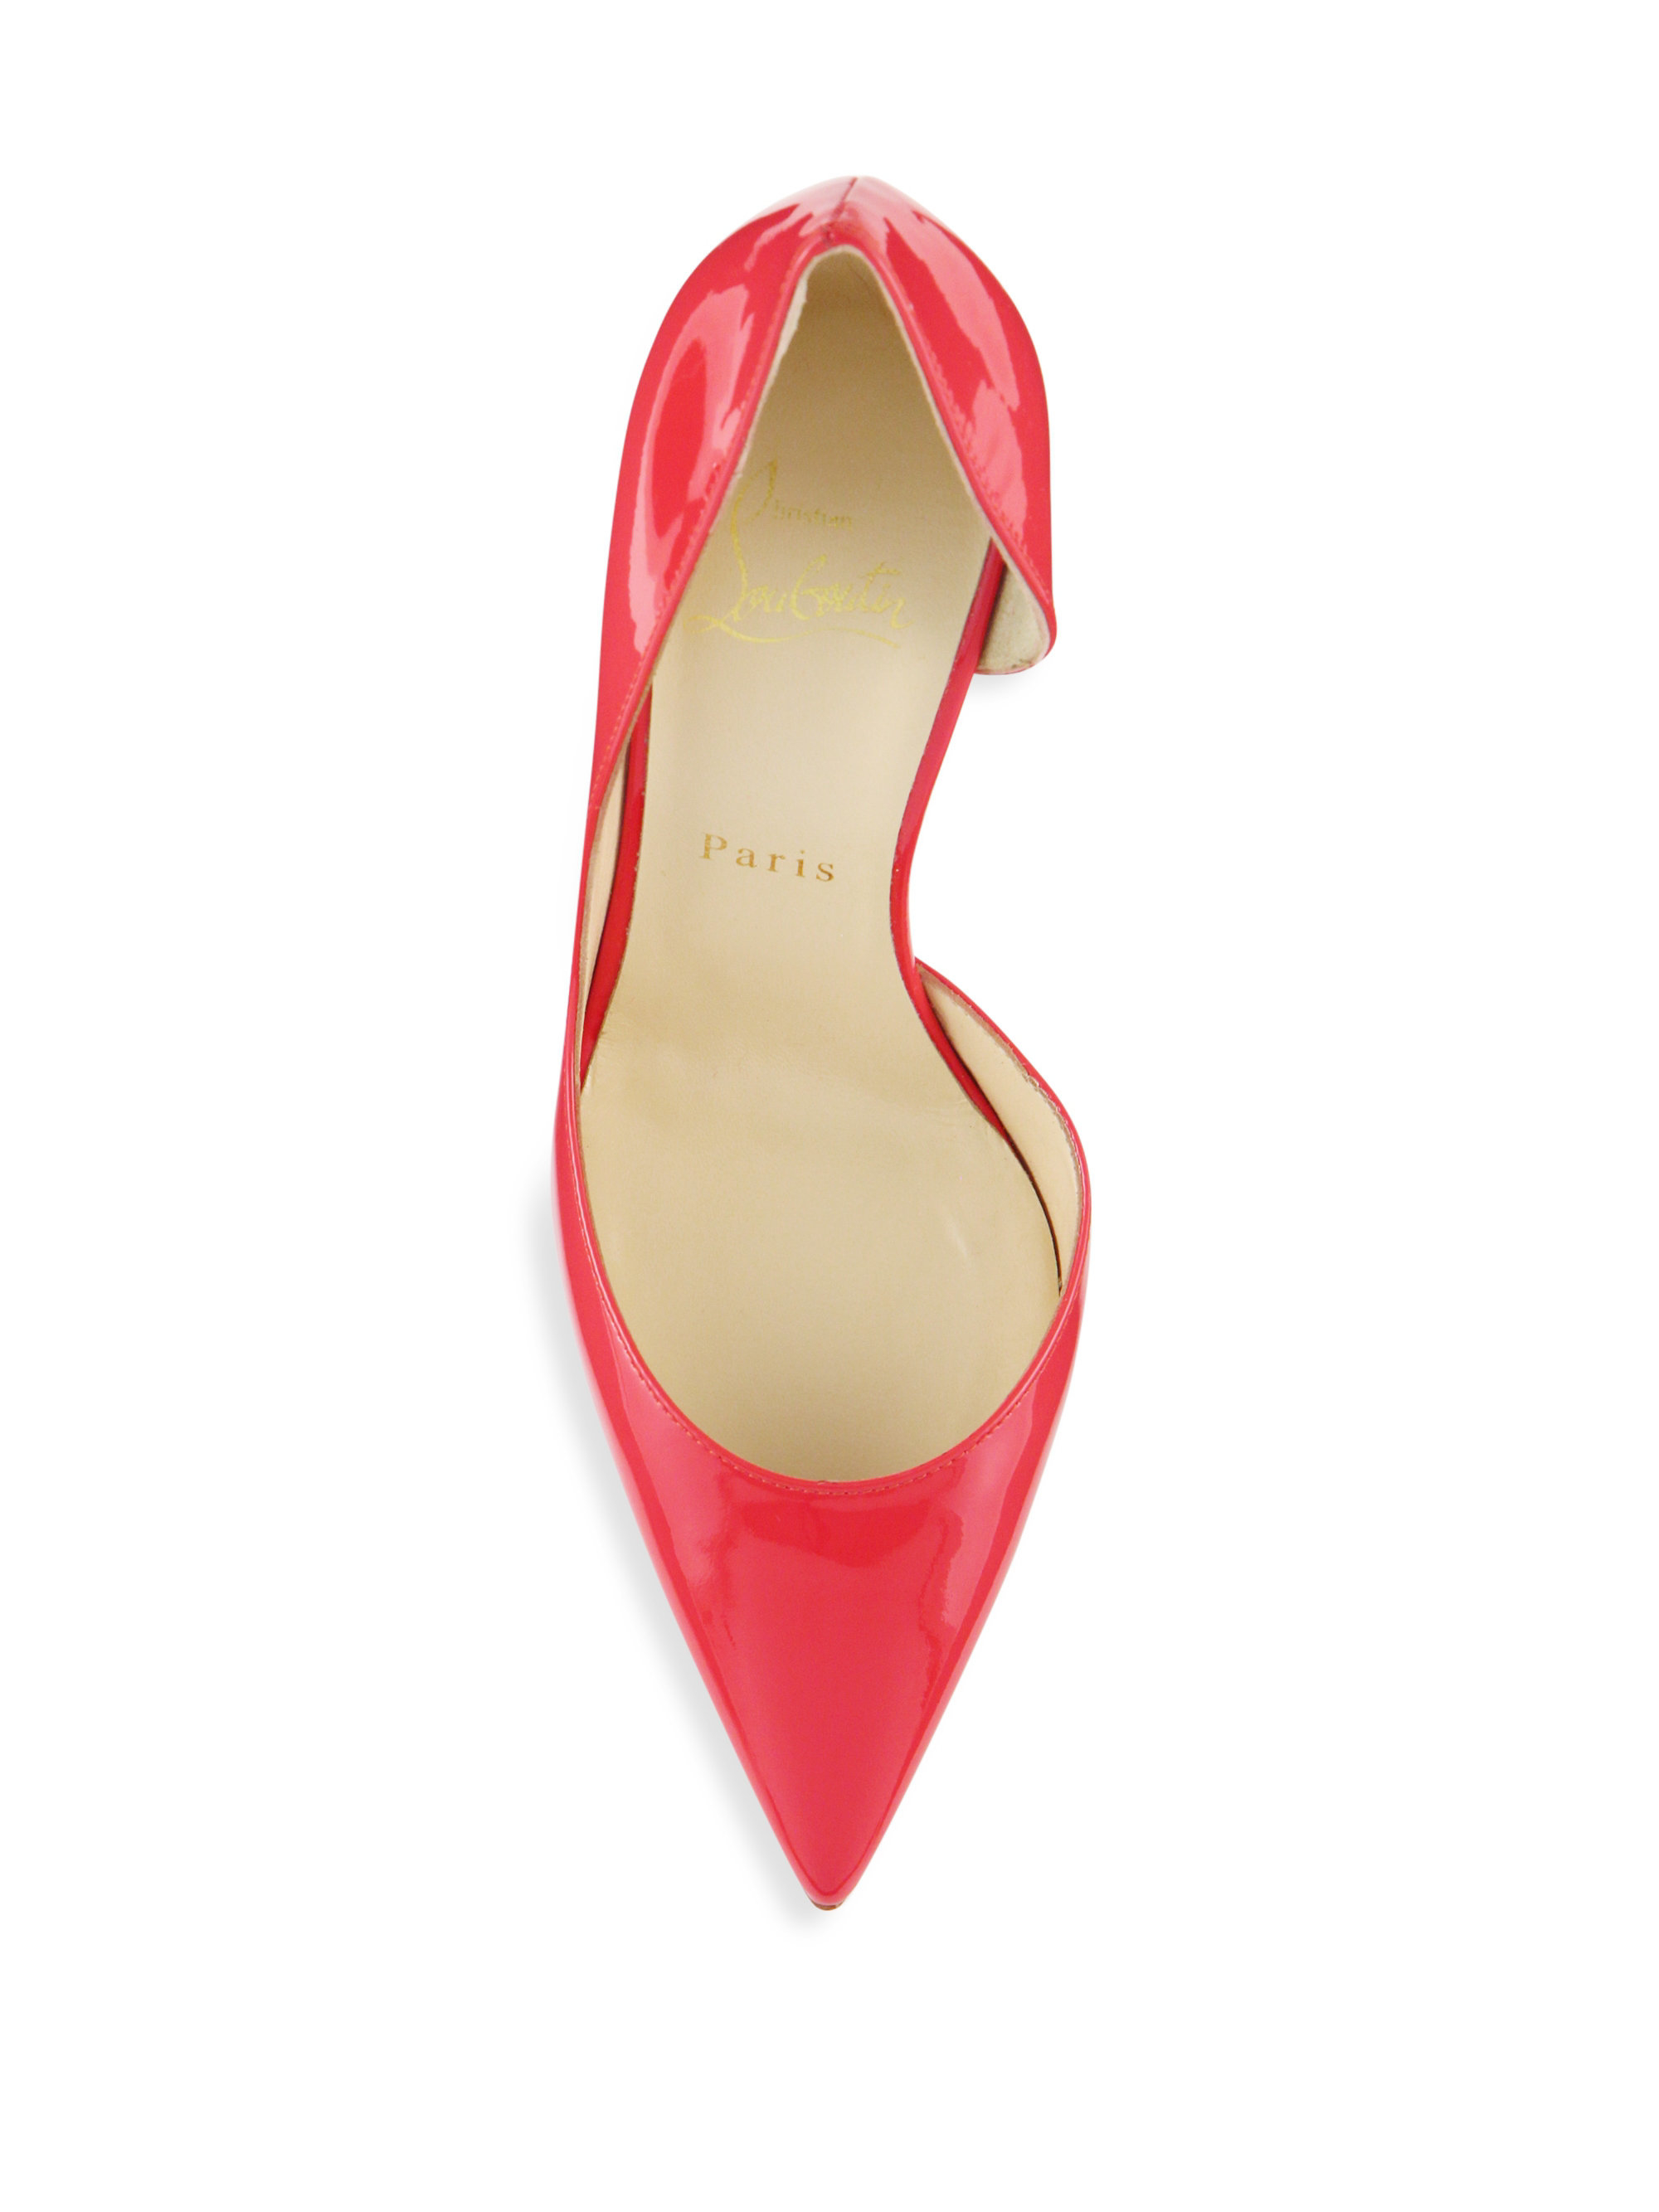 christian louis vuitton red bottom shoes - Christian louboutin Iriza Patent Leather Half D\u0026#39;orsay Pumps in Red ...